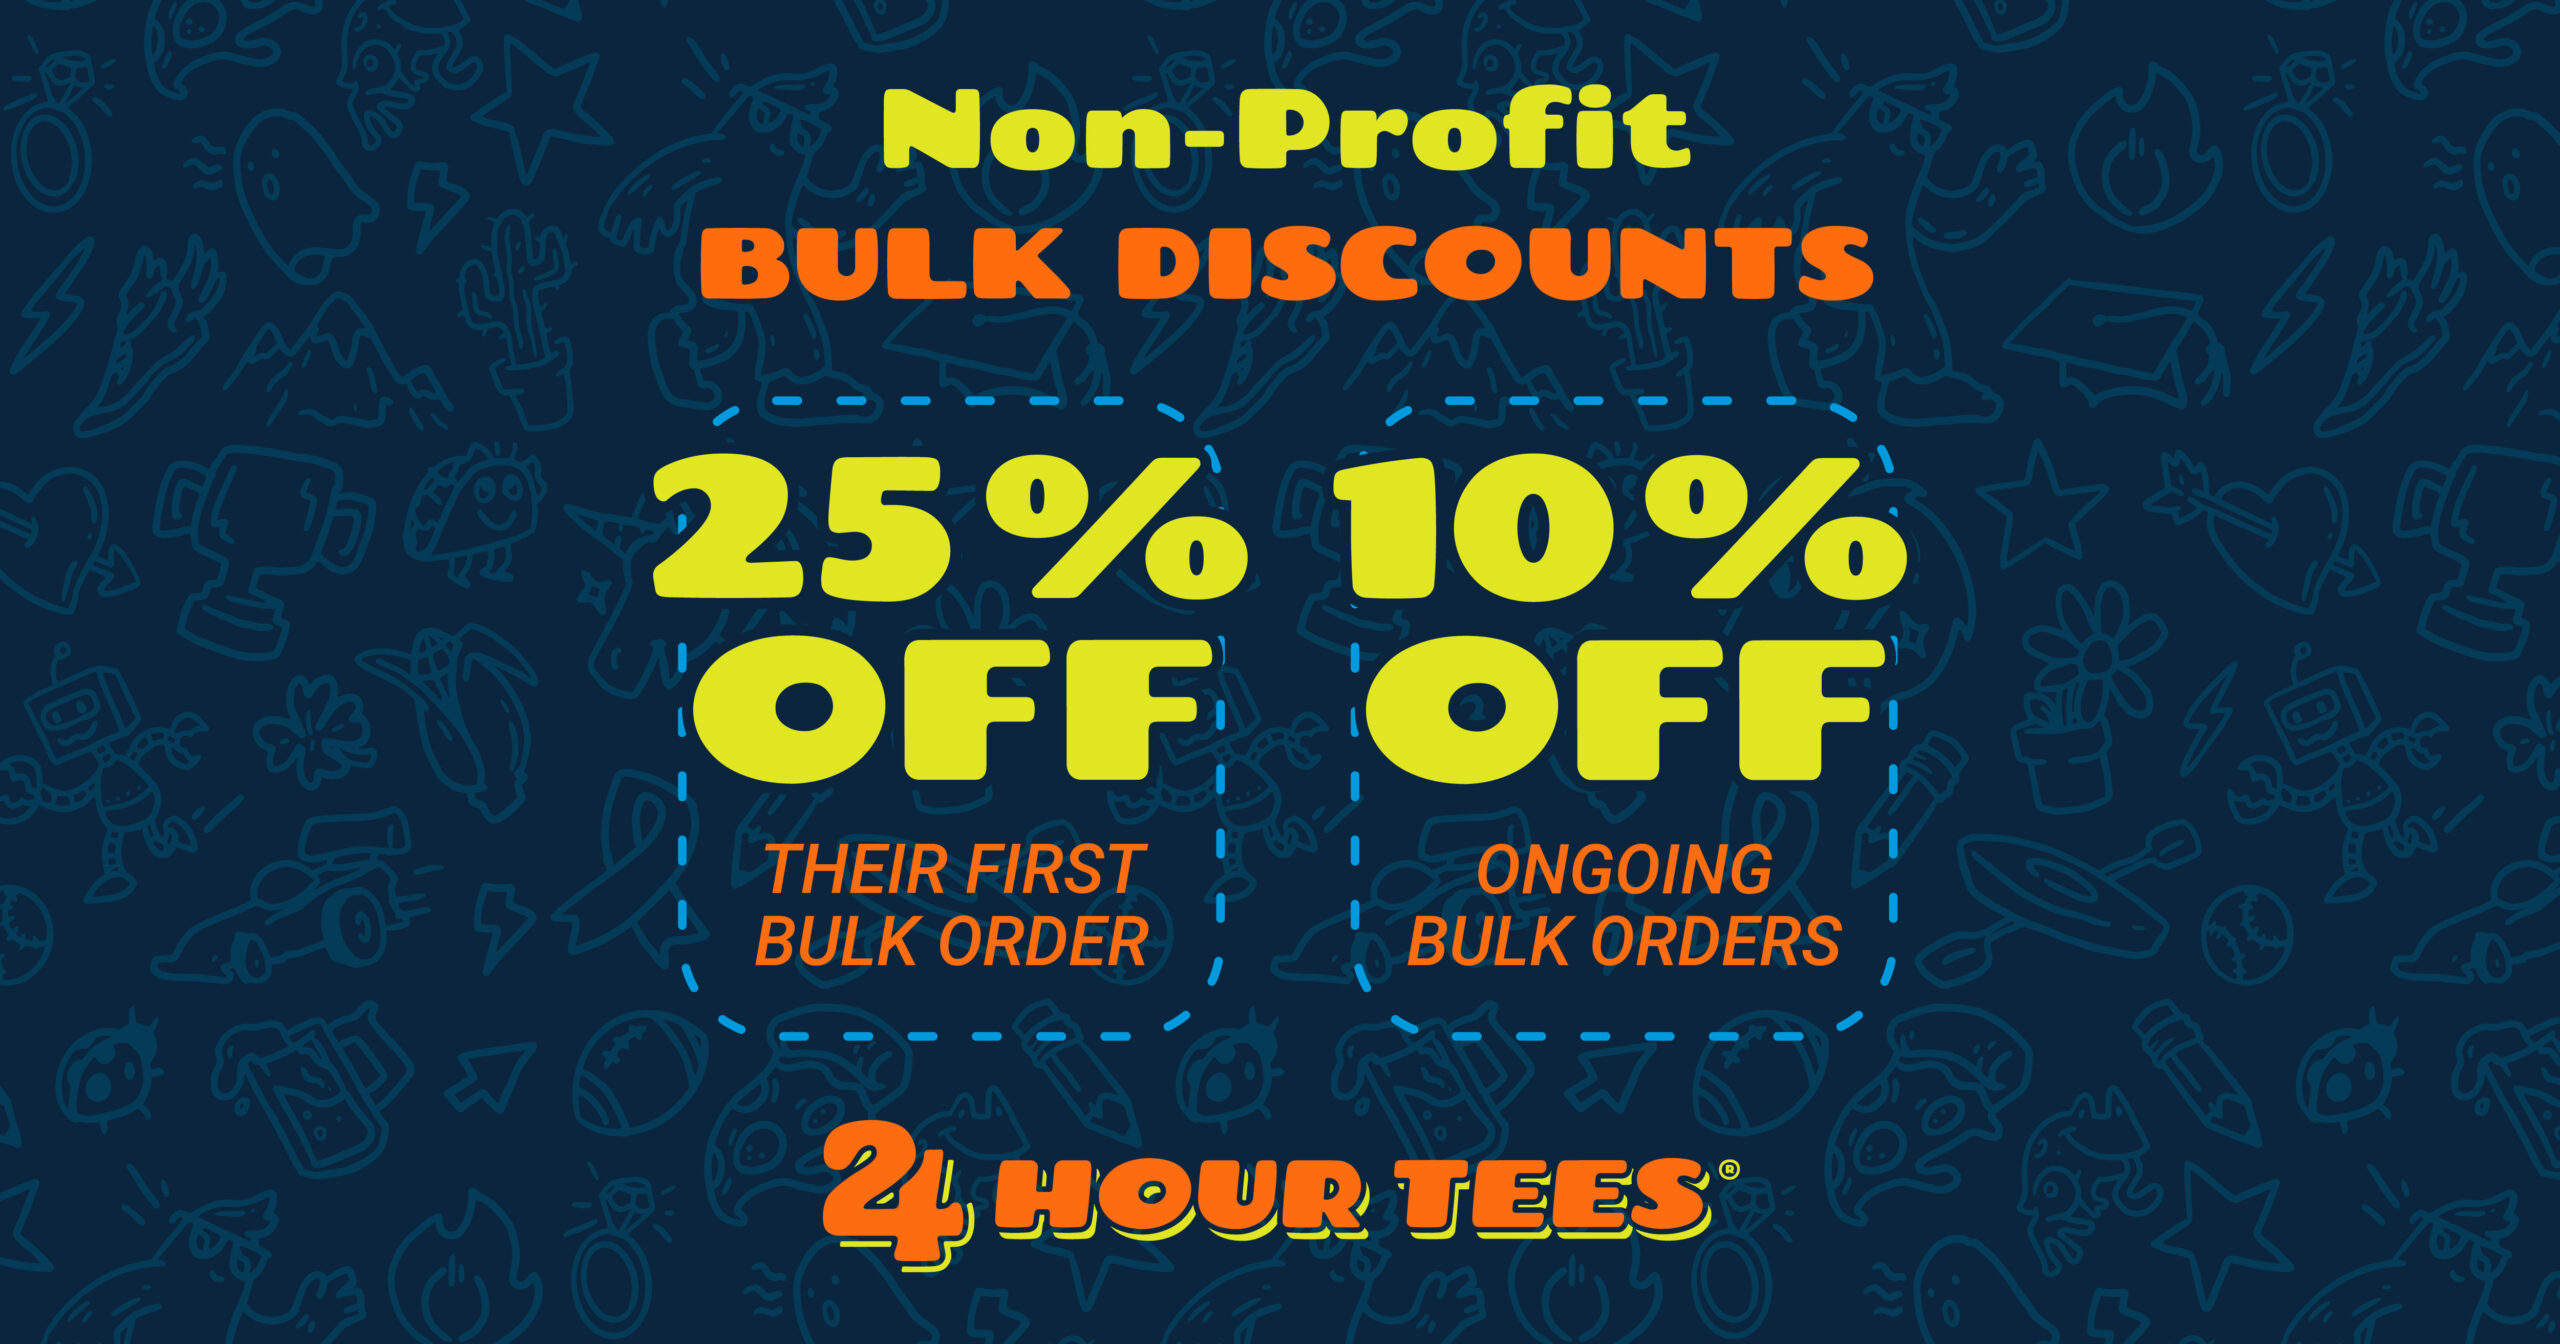 Discounts for non-profits explained. 25% off your first order, and 10% off ongoing! Get registered to to claim these discounts for your non-profit not!